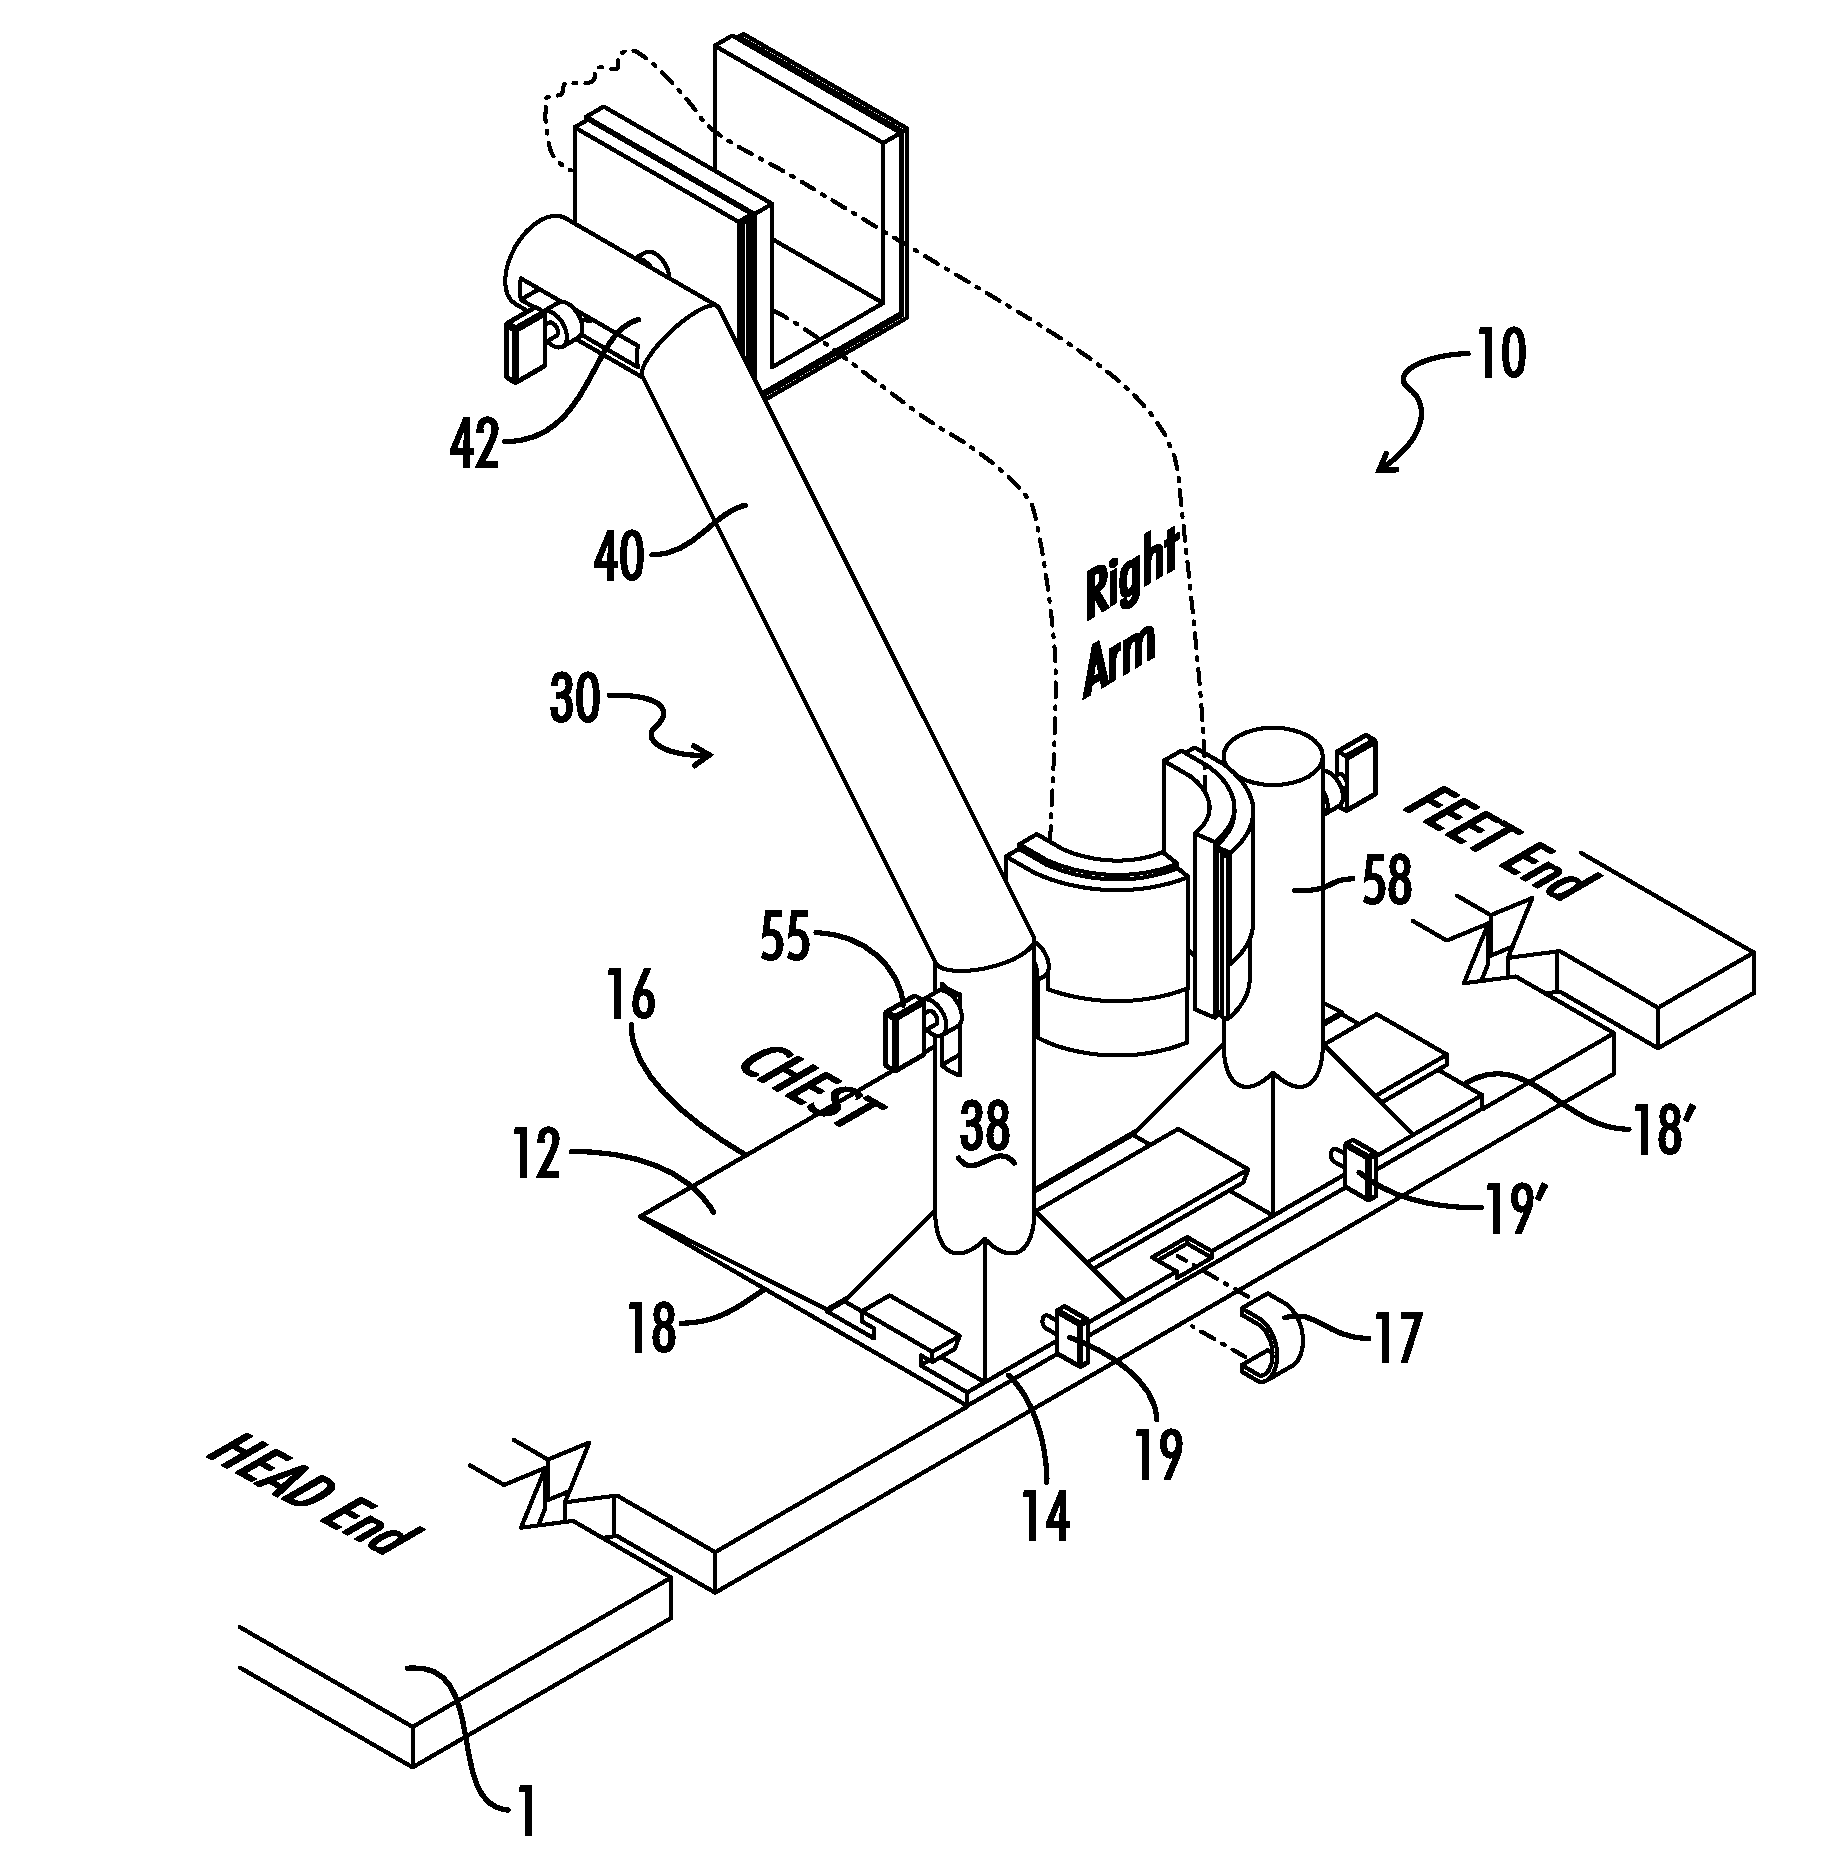 Arm stabilizer for elbow surgical procedure